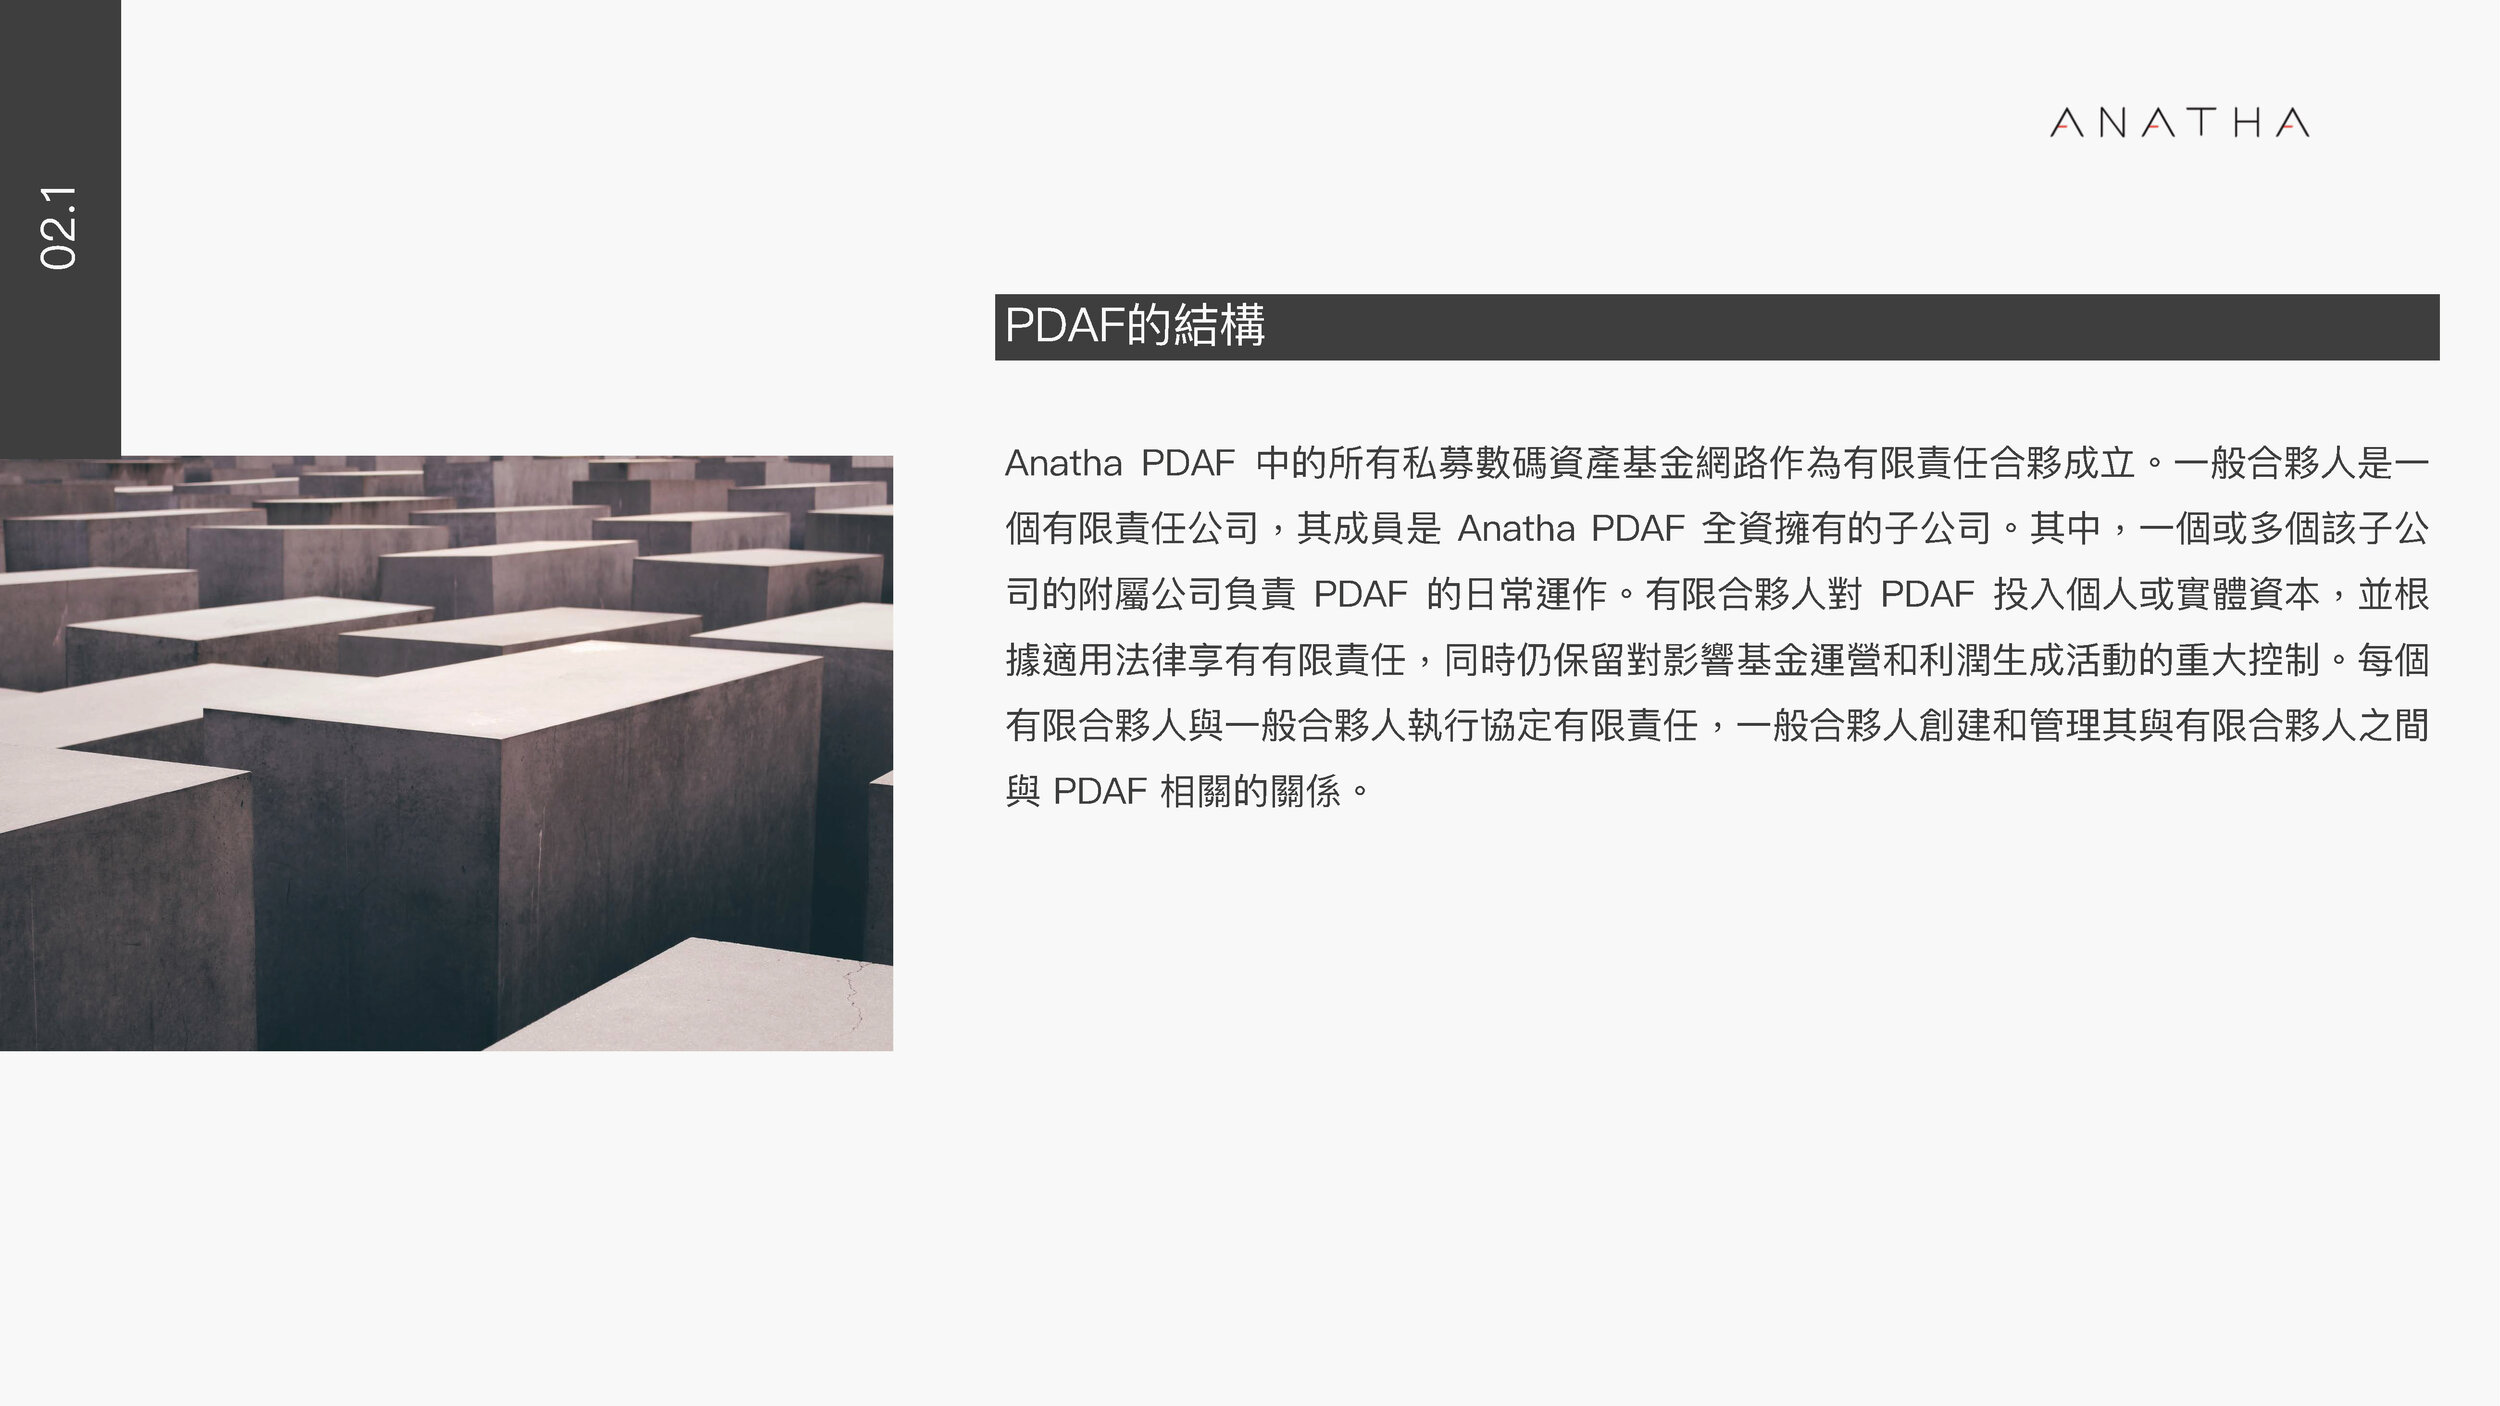 Anatha Pitch Deck - Traditional Chinese_Page_14.jpg